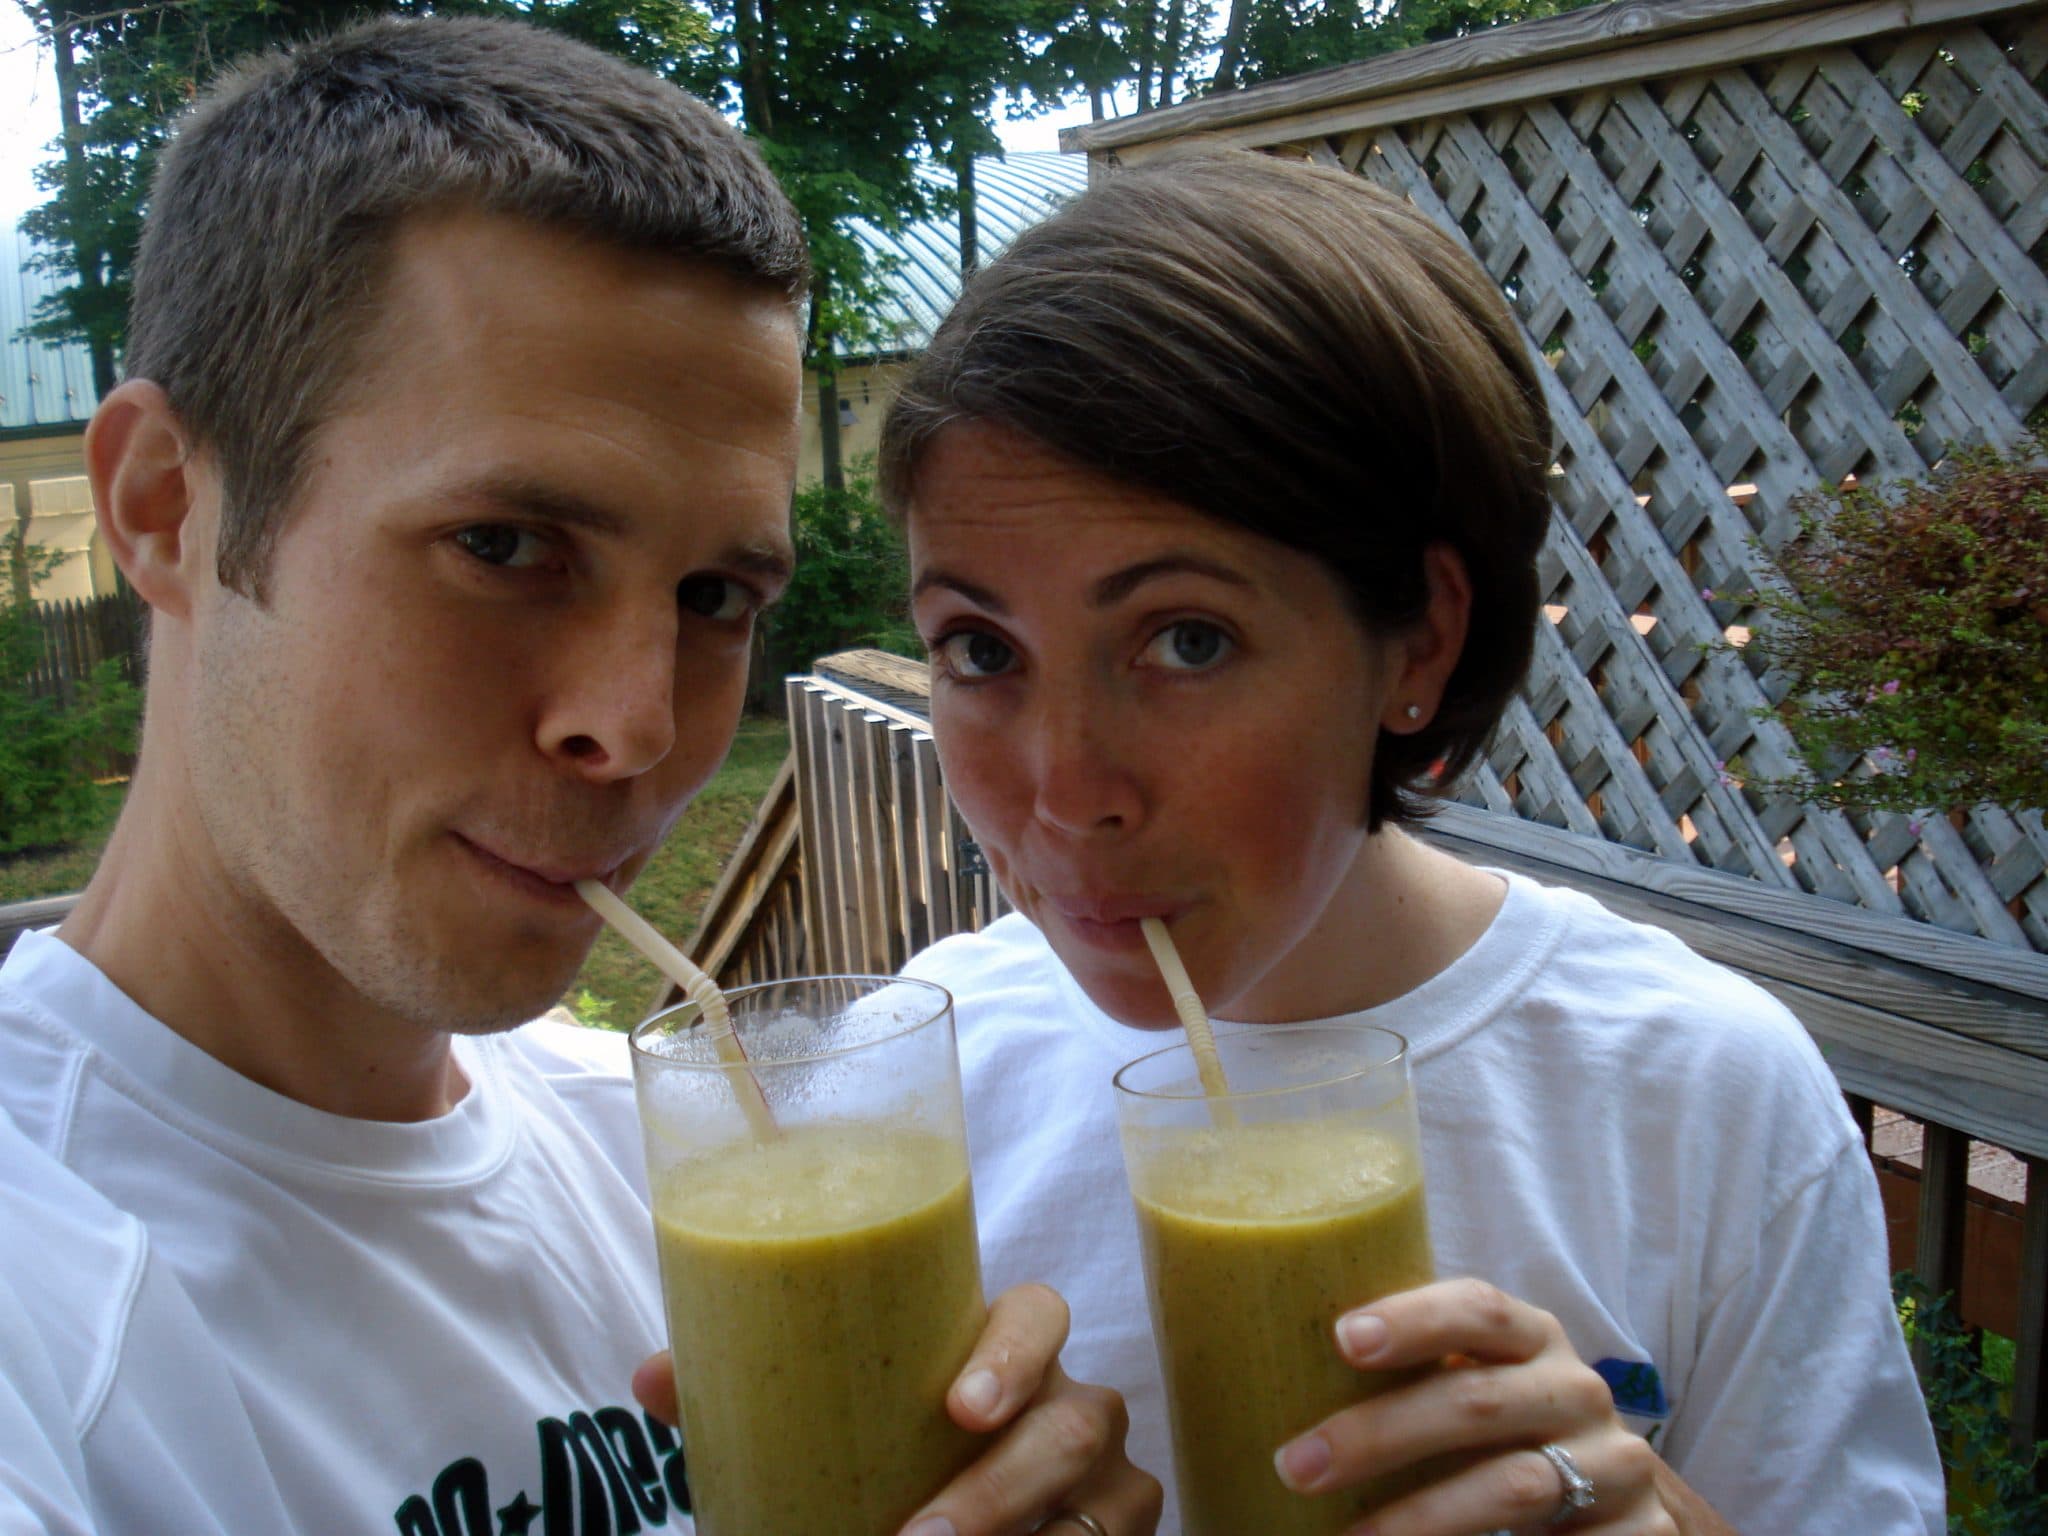 Matt and wife drinking Mango Lime Hot Pepper Smoothies